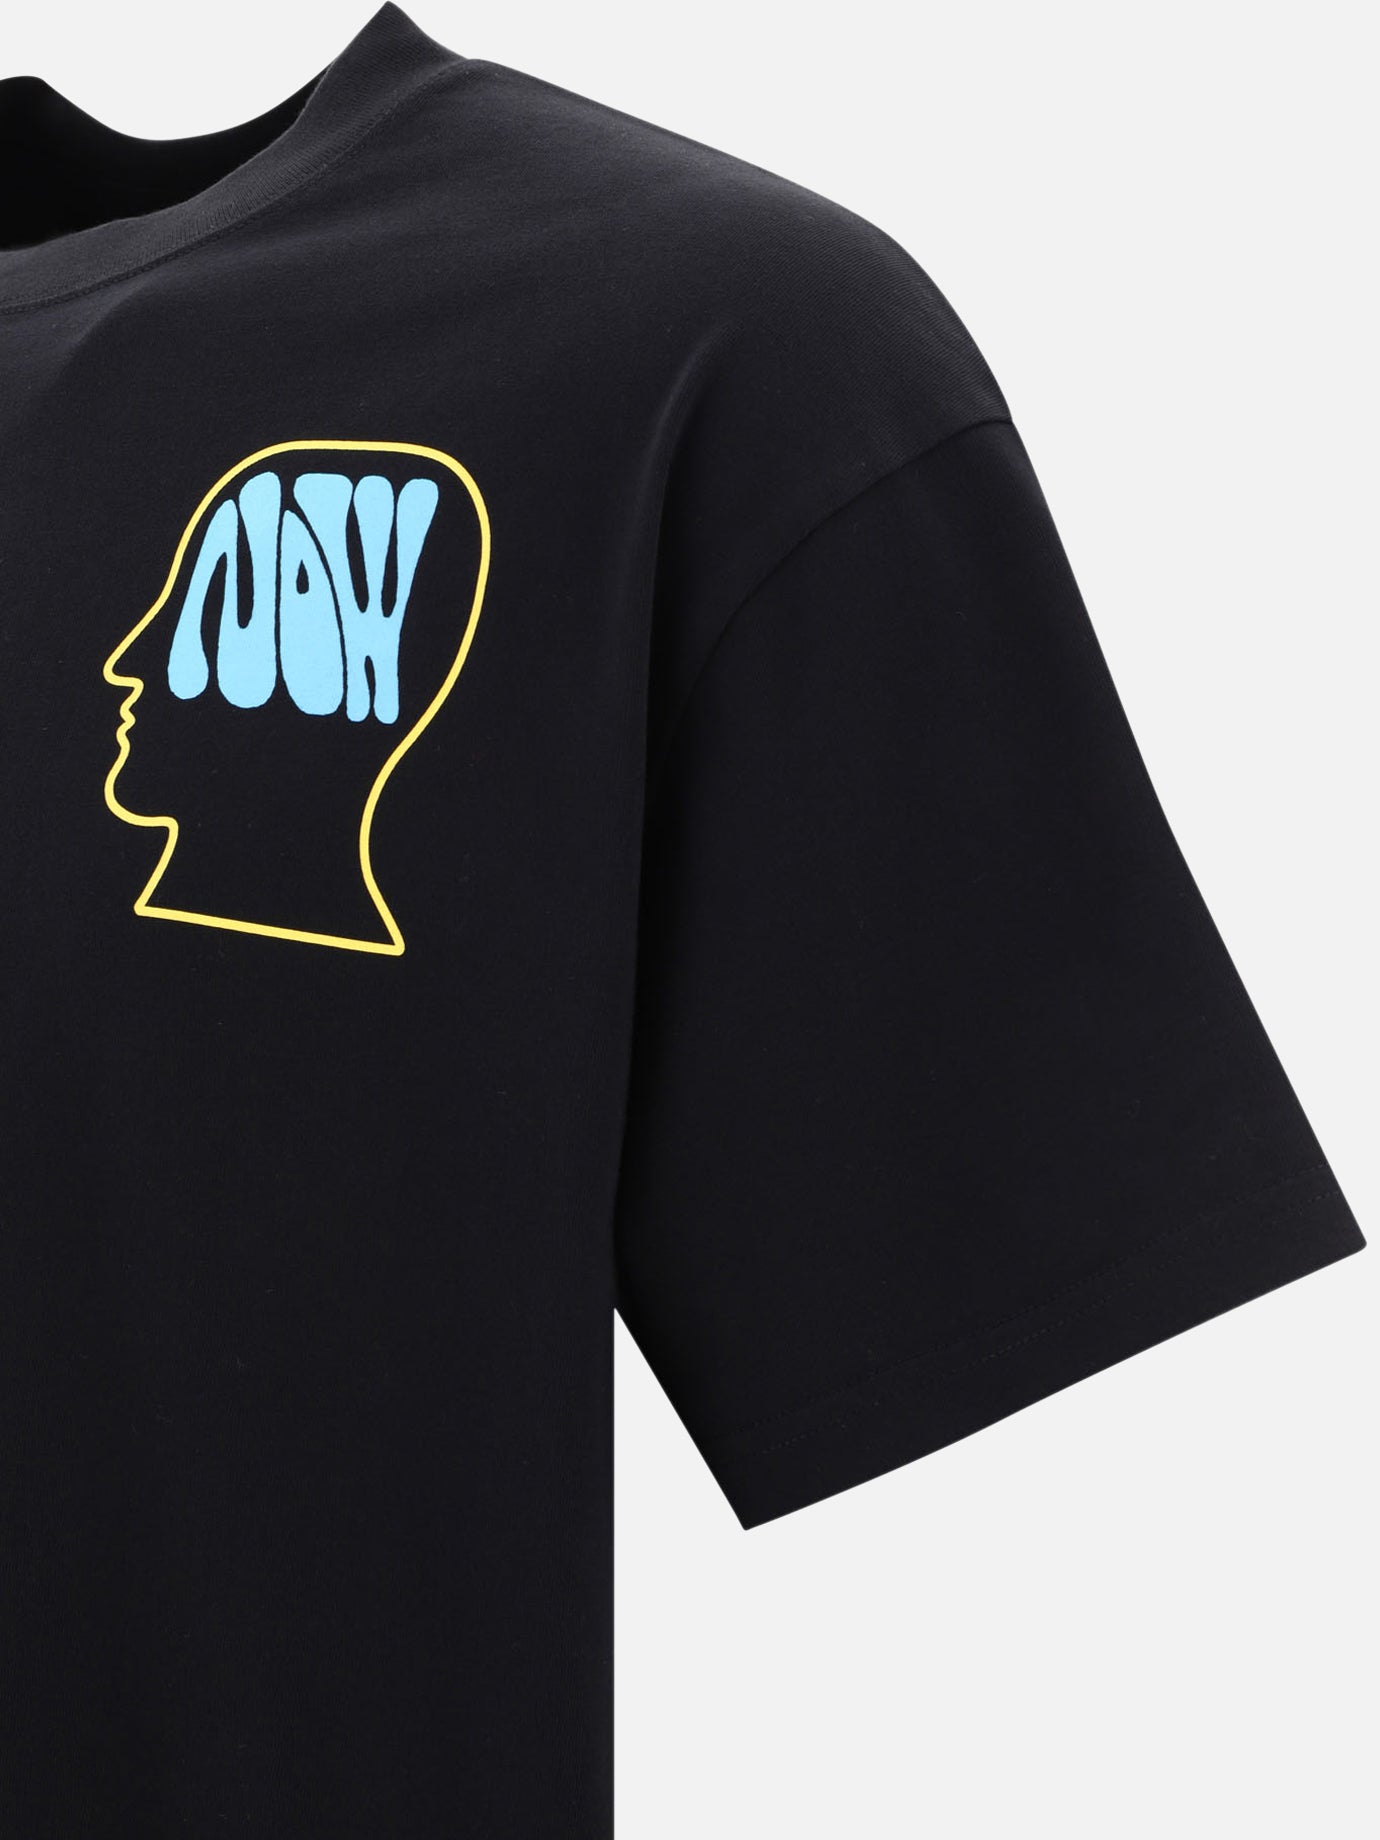 "The Now Movement" t-shirt